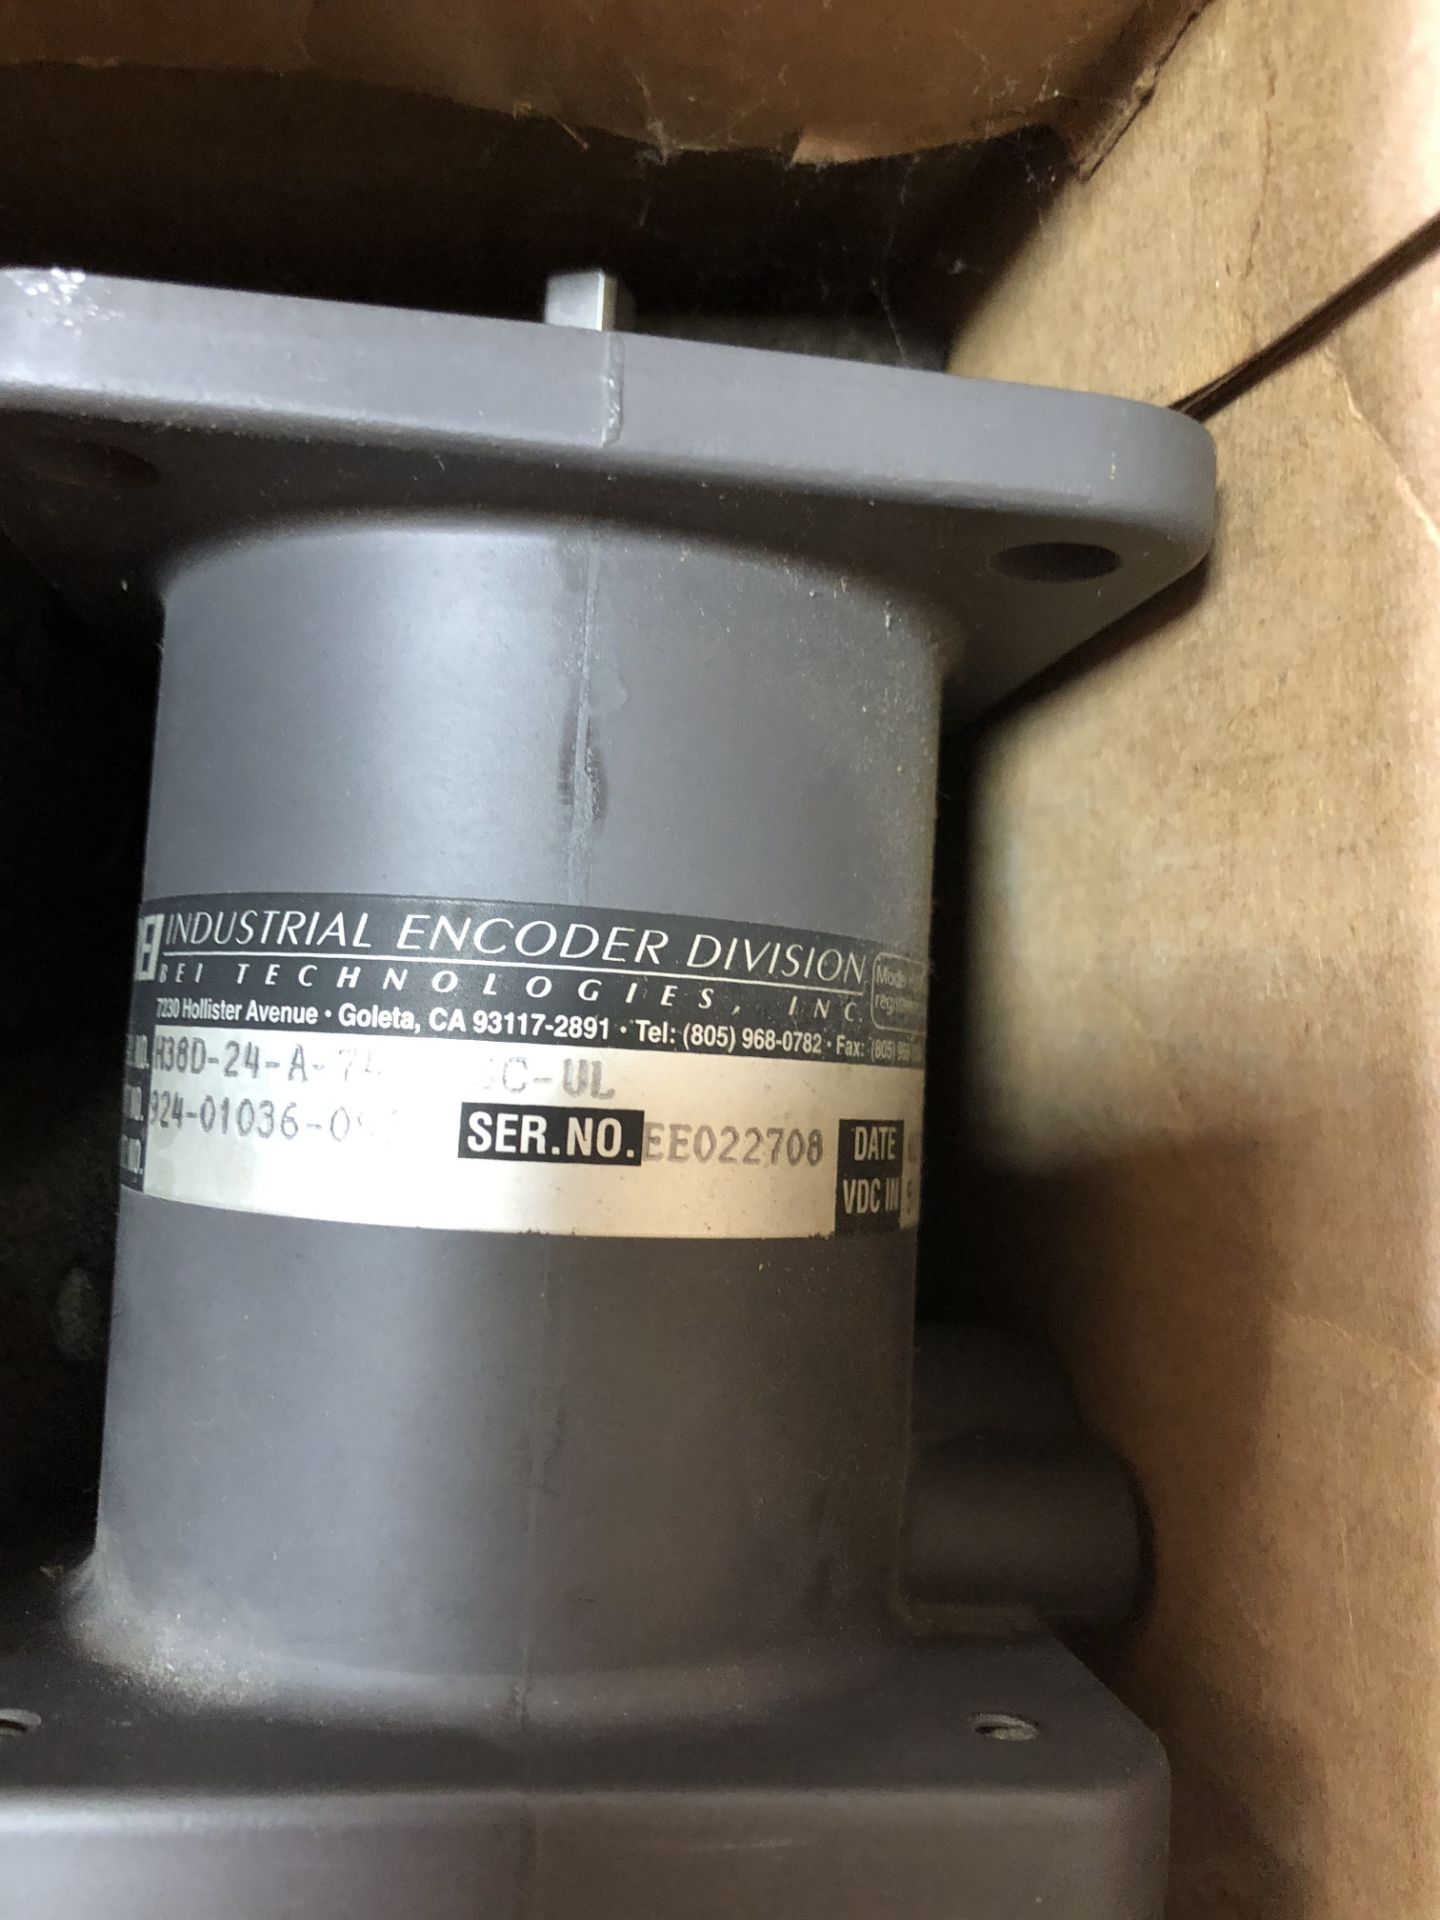 BEI INDUSTRIAL ENCODER DIVISION MODEL-H36D-24-A-7406-SC-0L P#924-01036-093(LOCATED AT 2696 E LYTLE 5